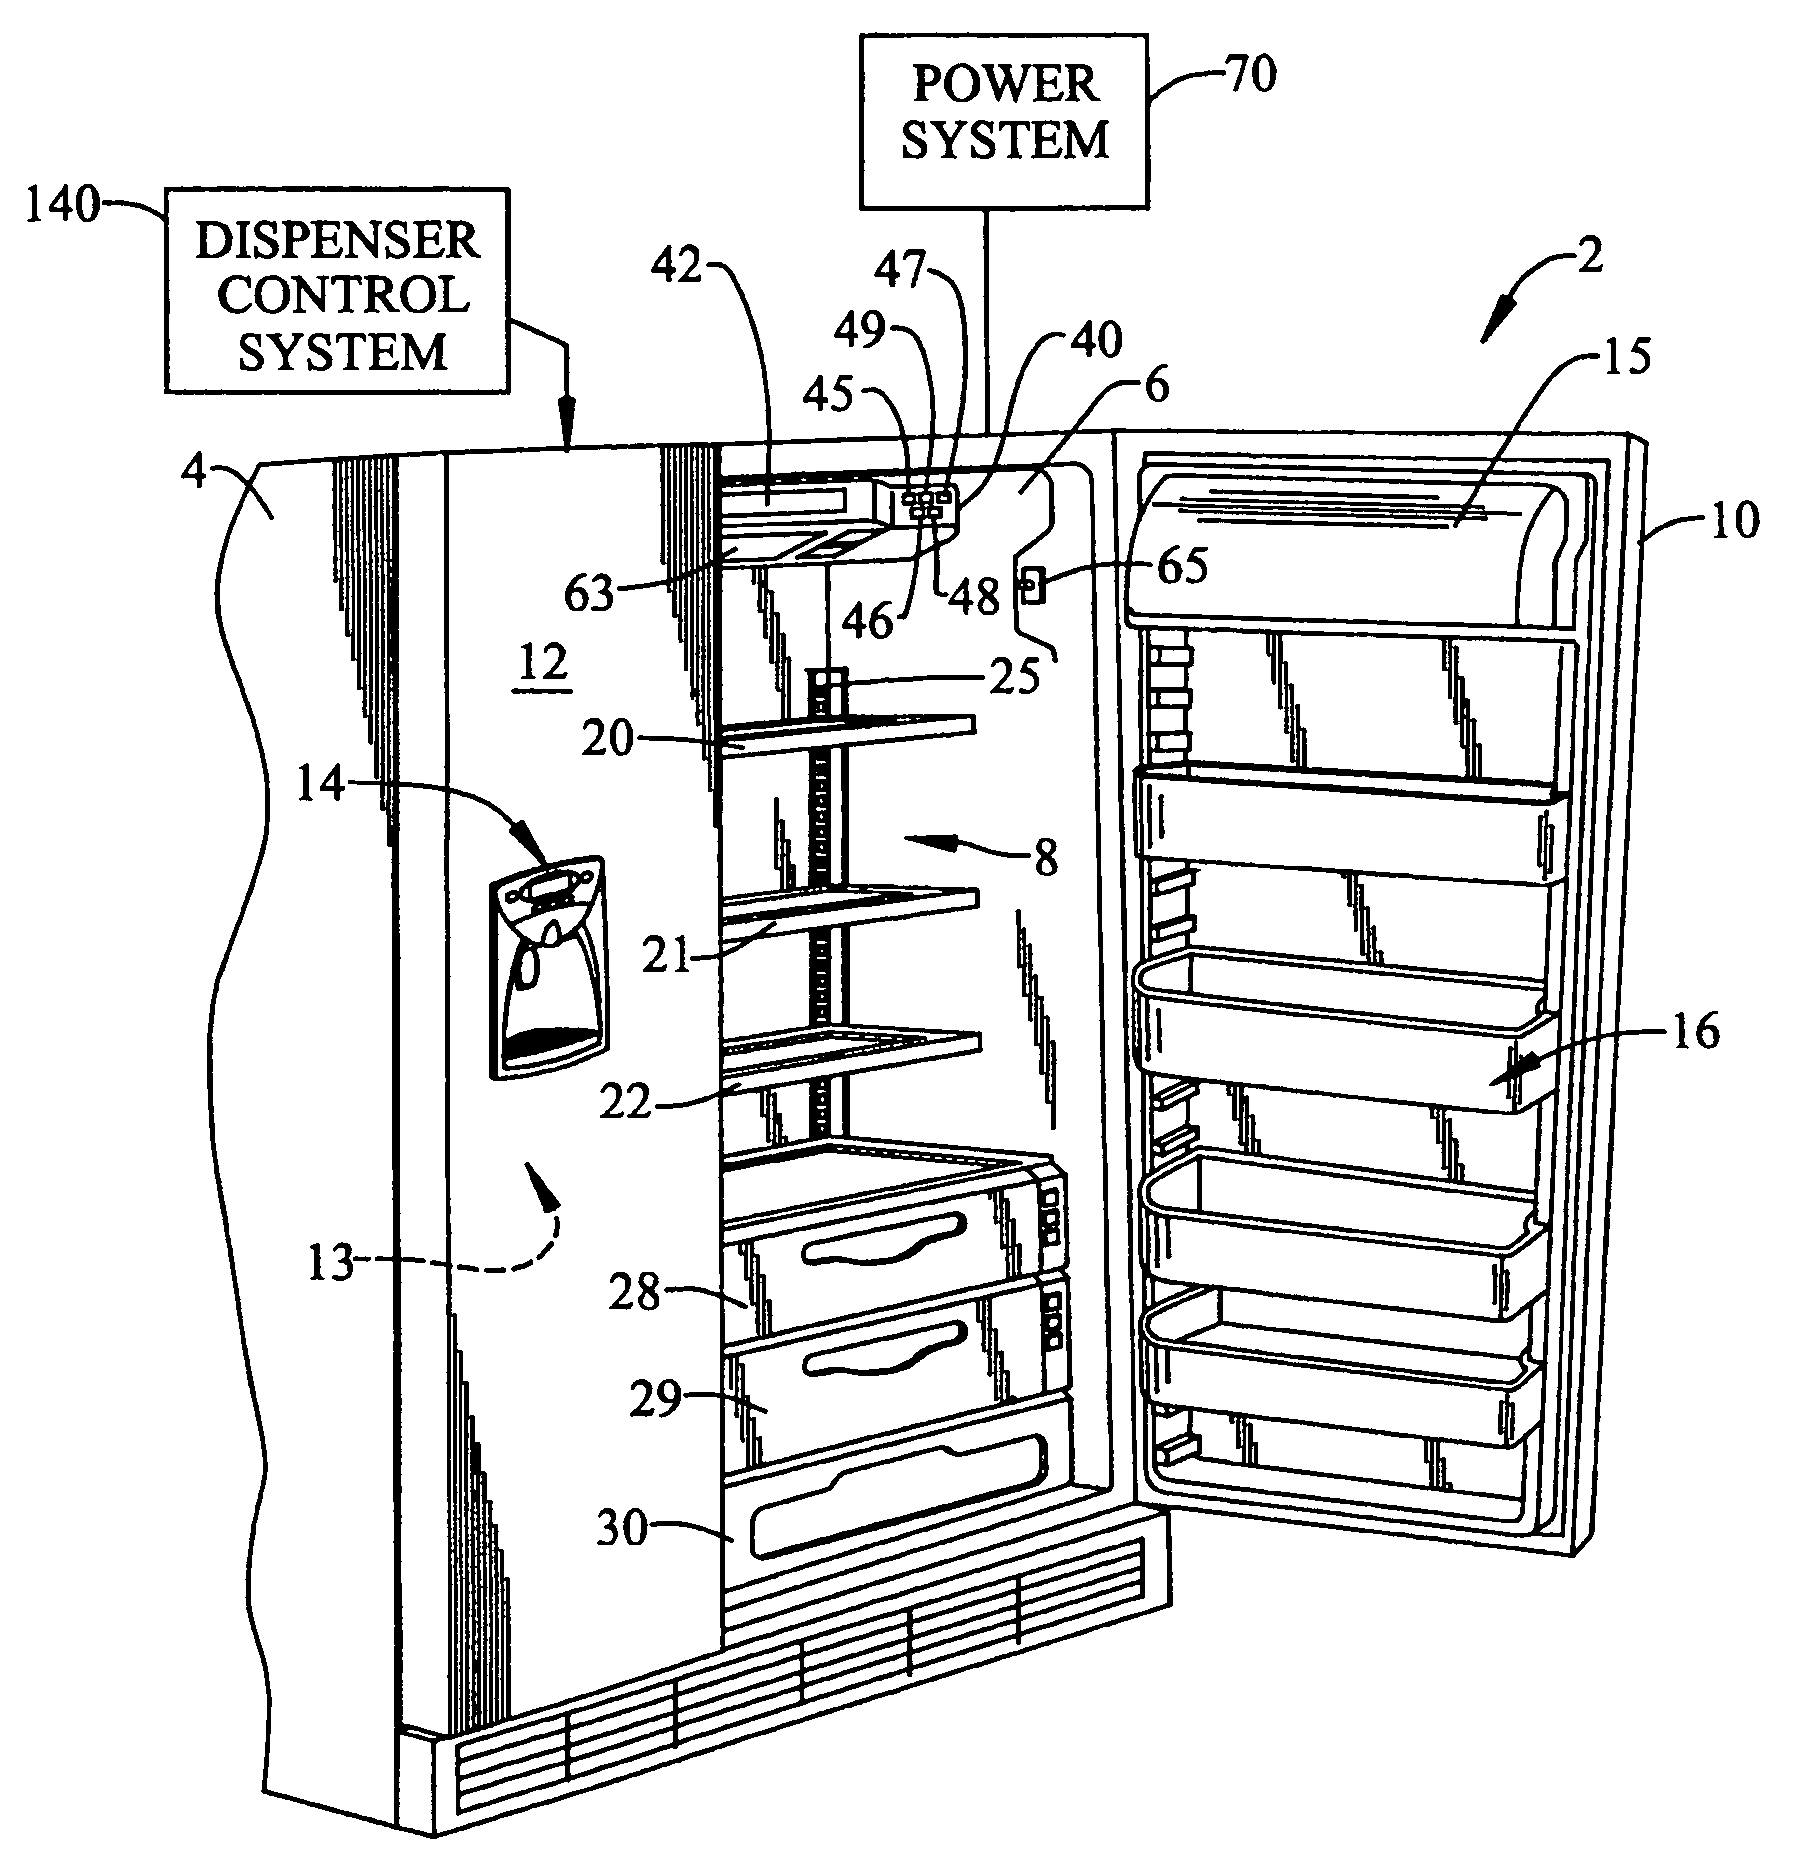 Control system for a refrigerator ice/water dispenser